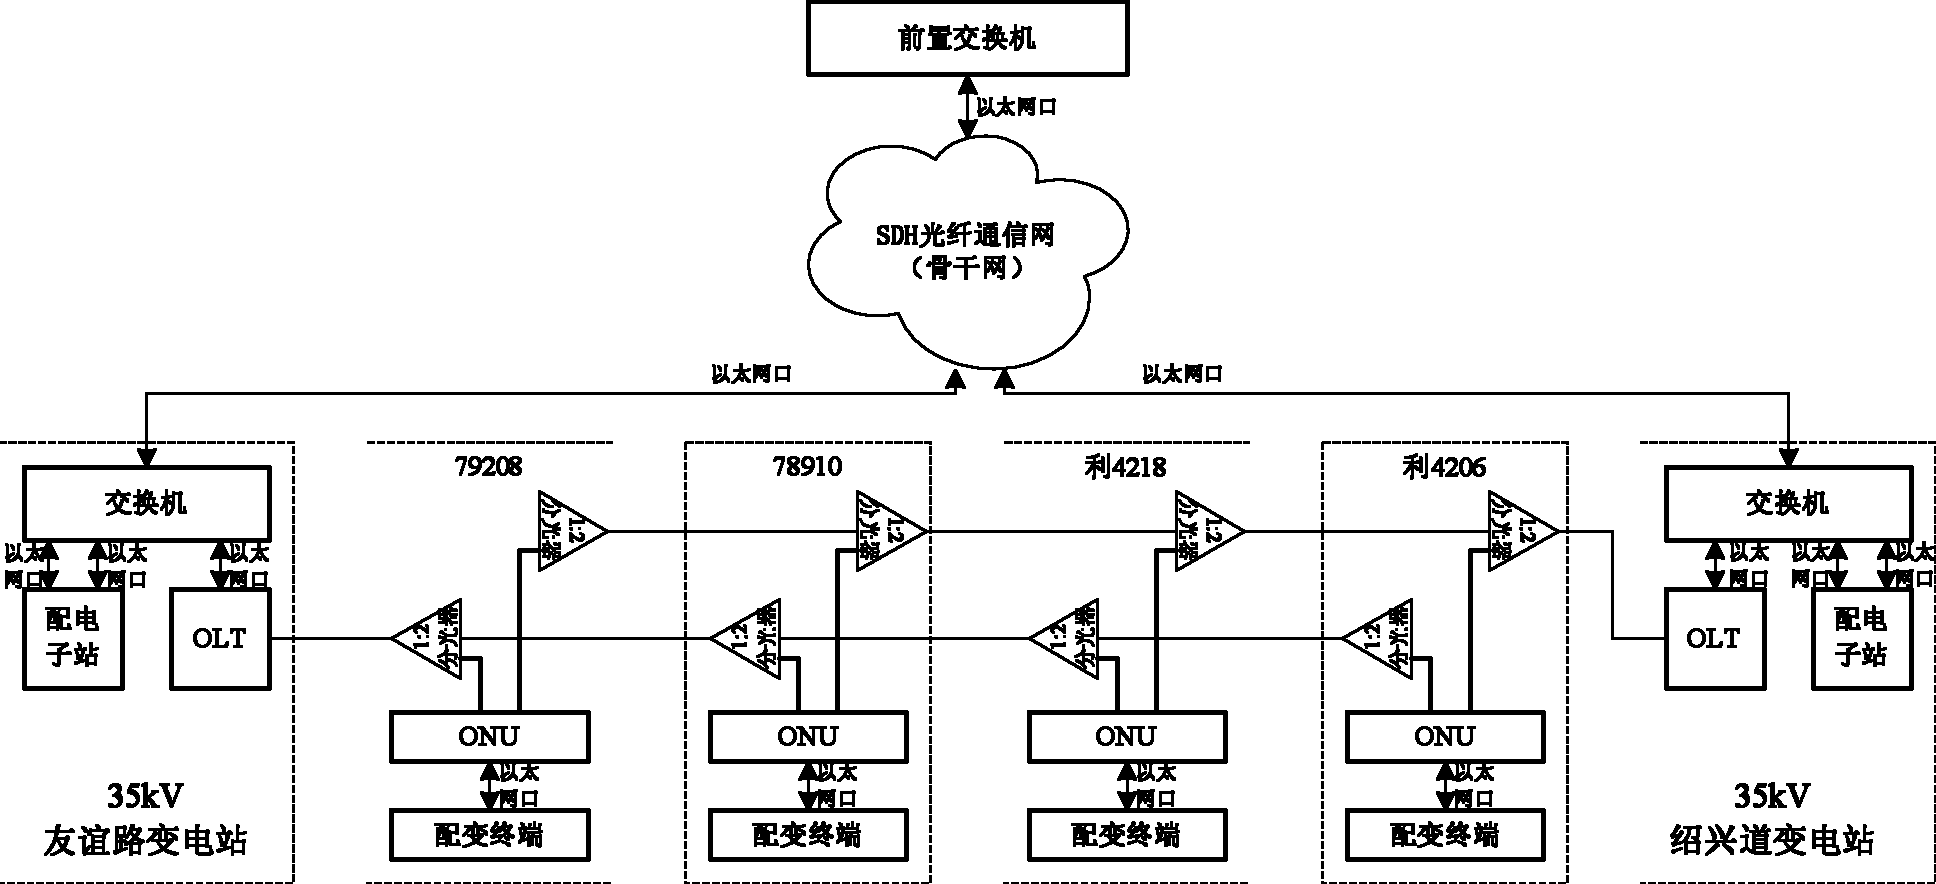 Intelligent distribution automation communication system for power grid